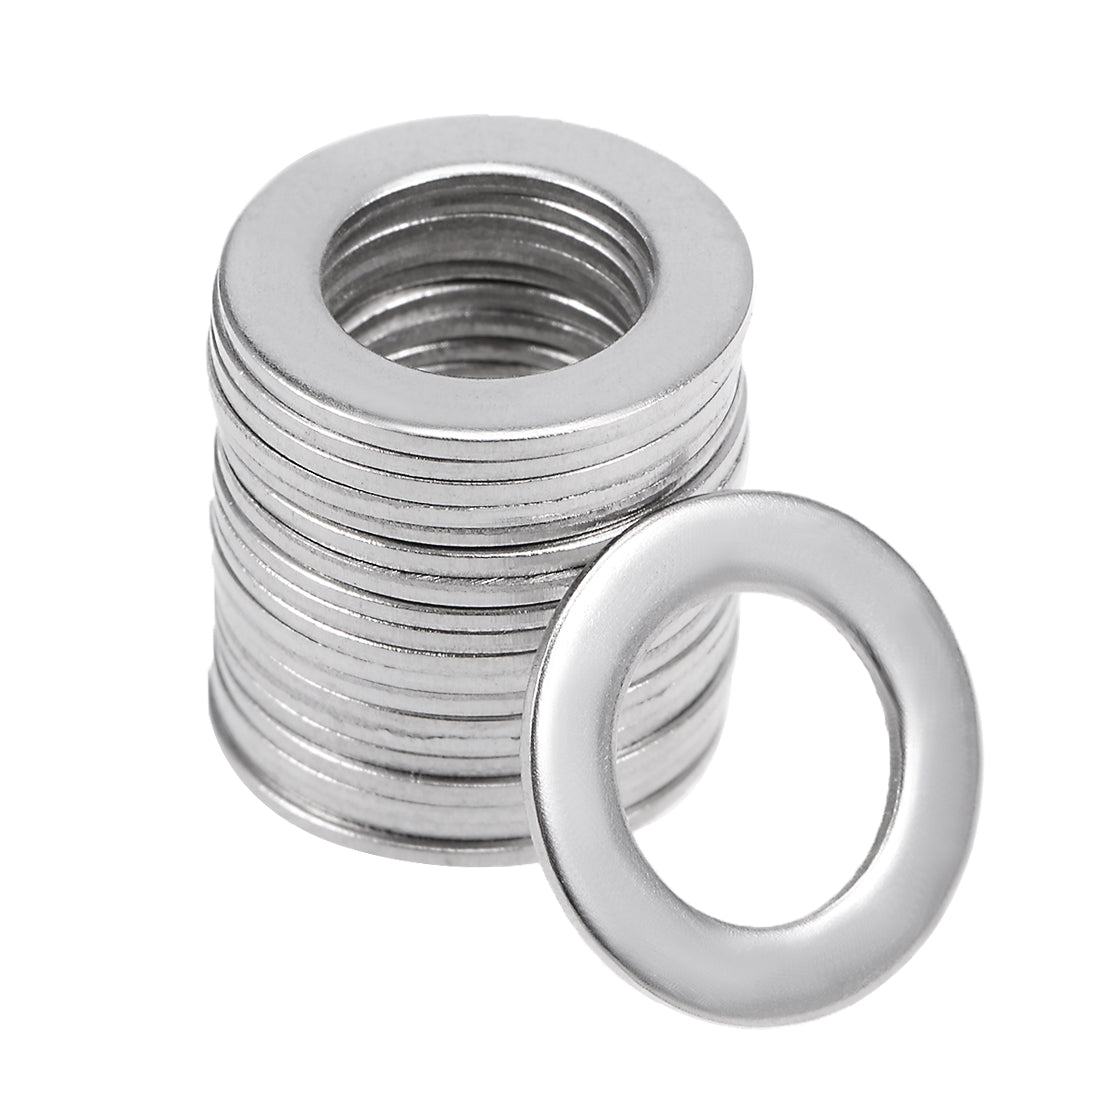 uxcell Uxcell 20 Pcs 8.5mm x 14mm x 0.8mm 304 Stainless Steel Flat Washer for Screw Bolt